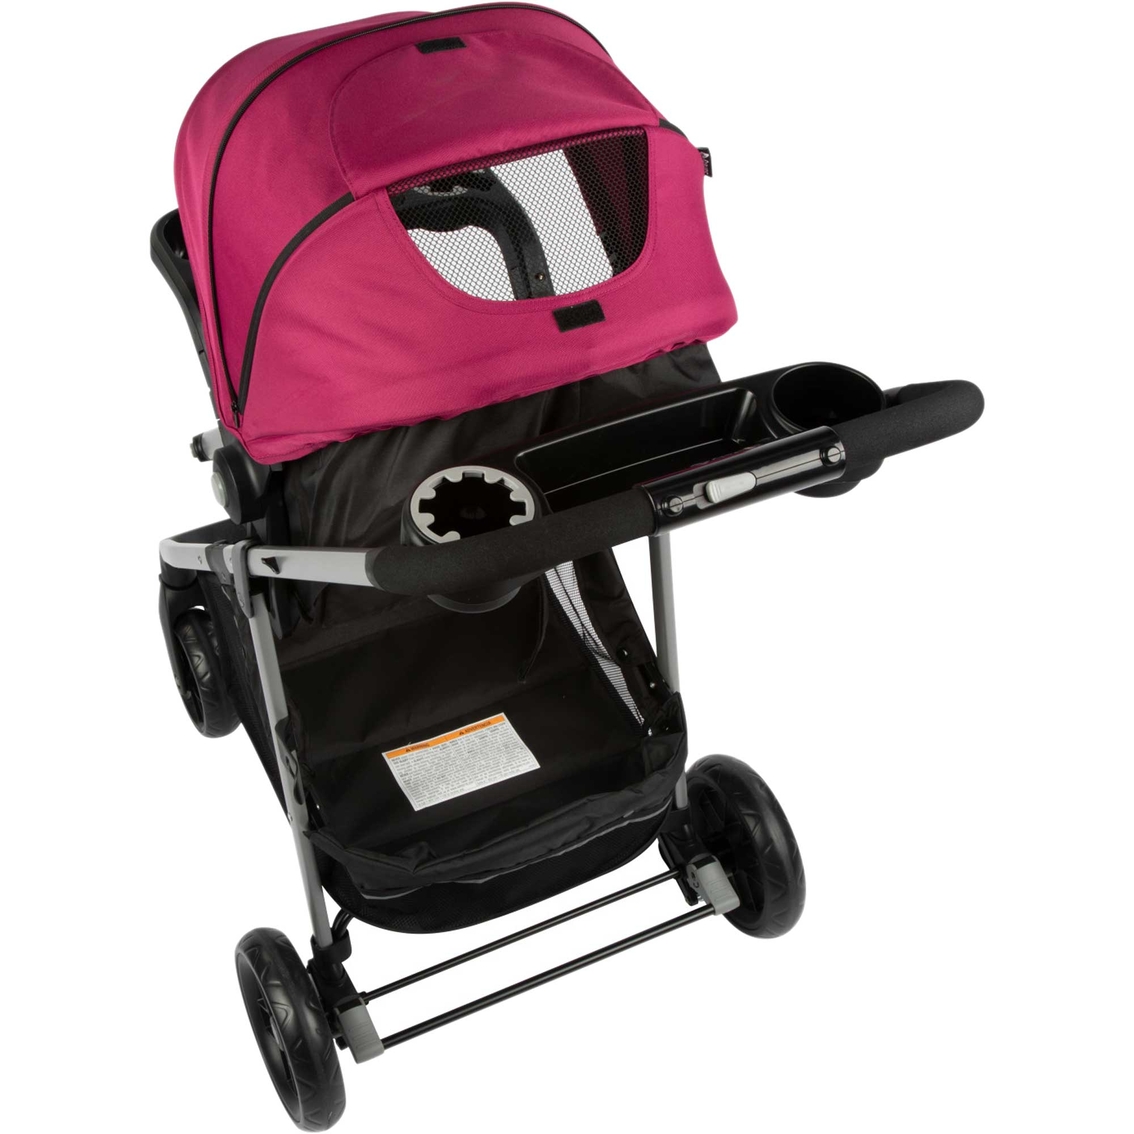 Safety 1st Grow and Go Flex 8 in 1 Travel System - Image 2 of 10